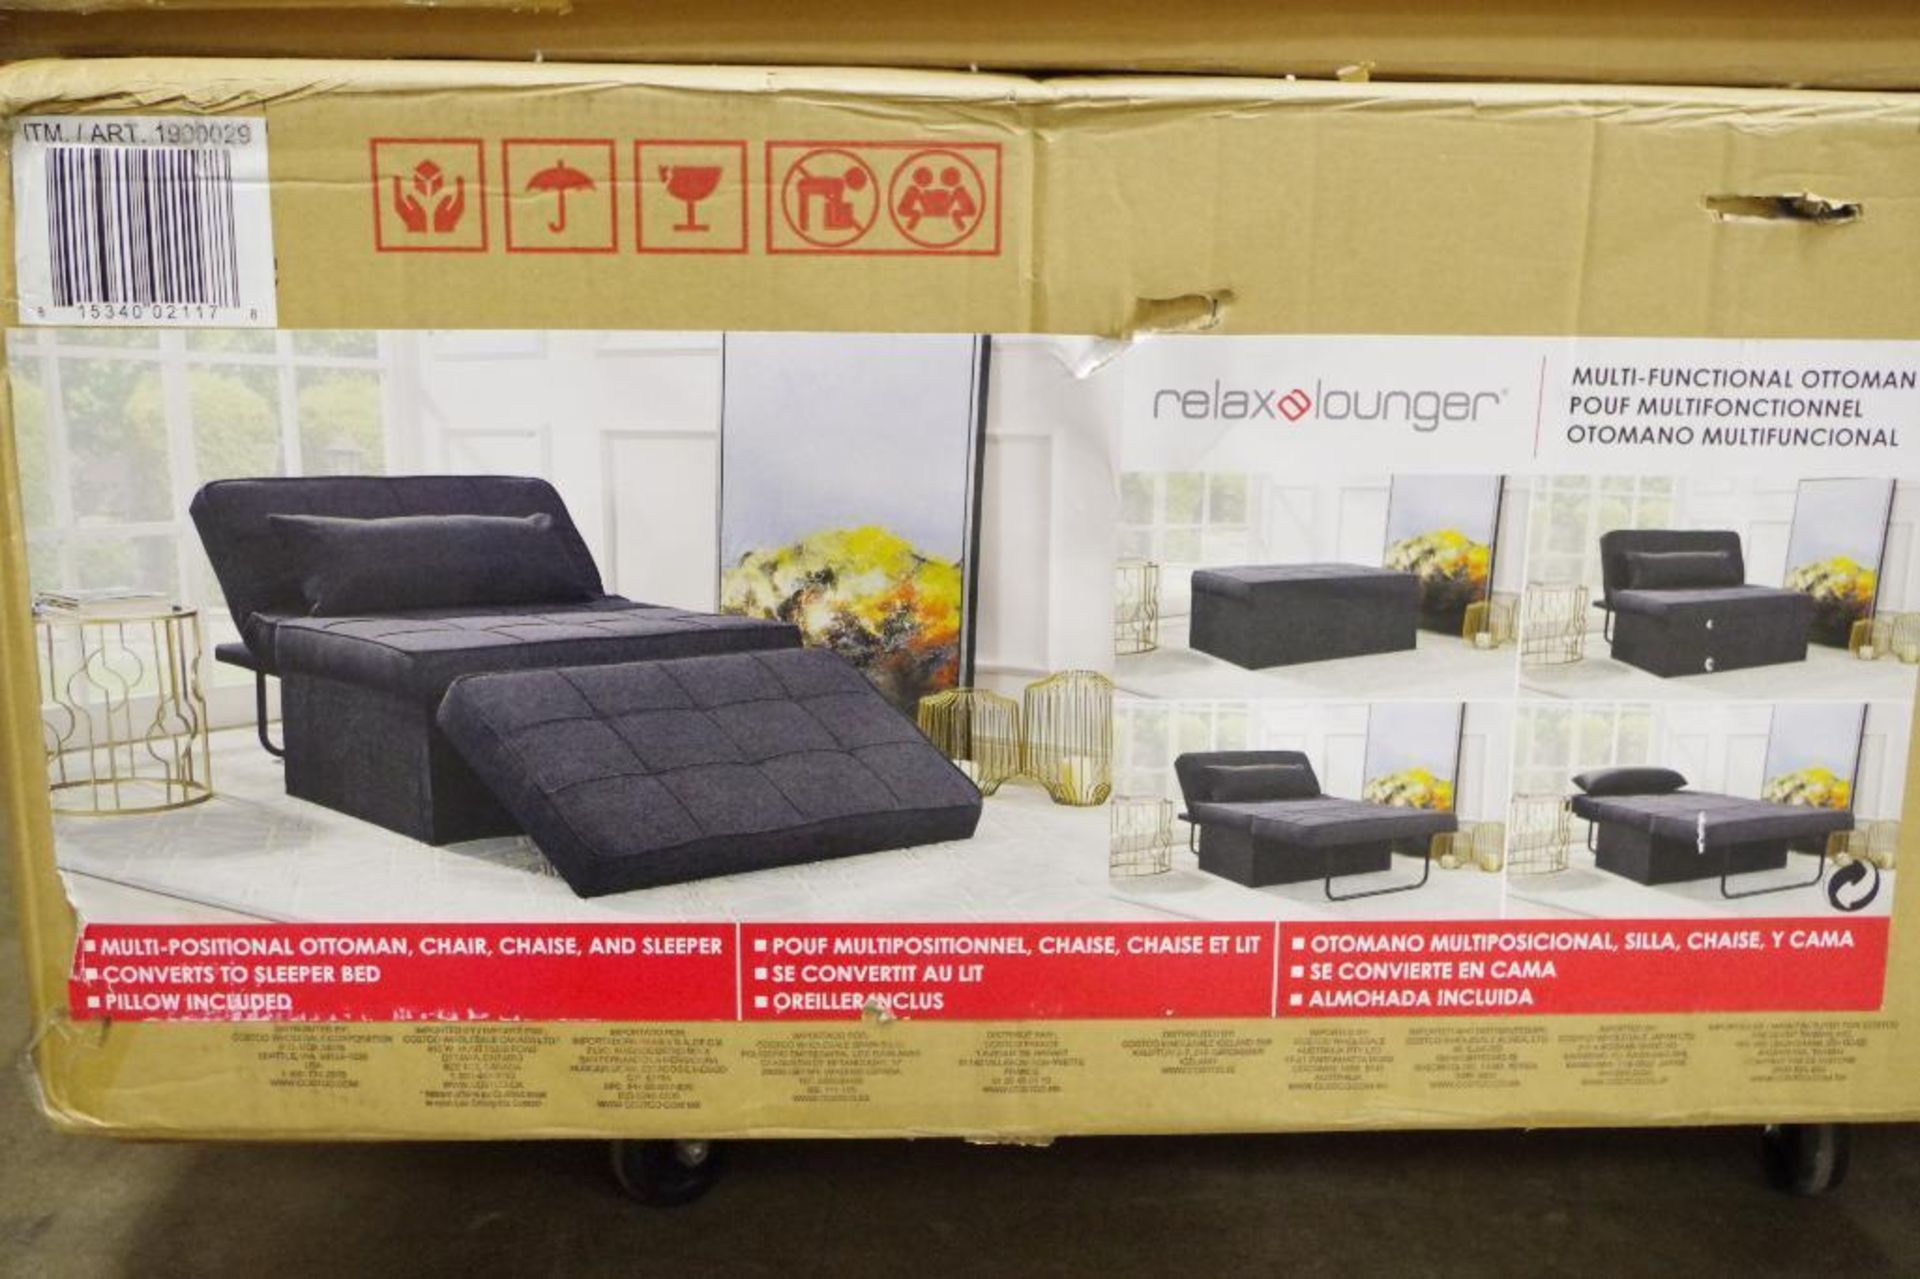 NEW Relax-a-Lounger Multi-Function Ottoman - Image 2 of 3